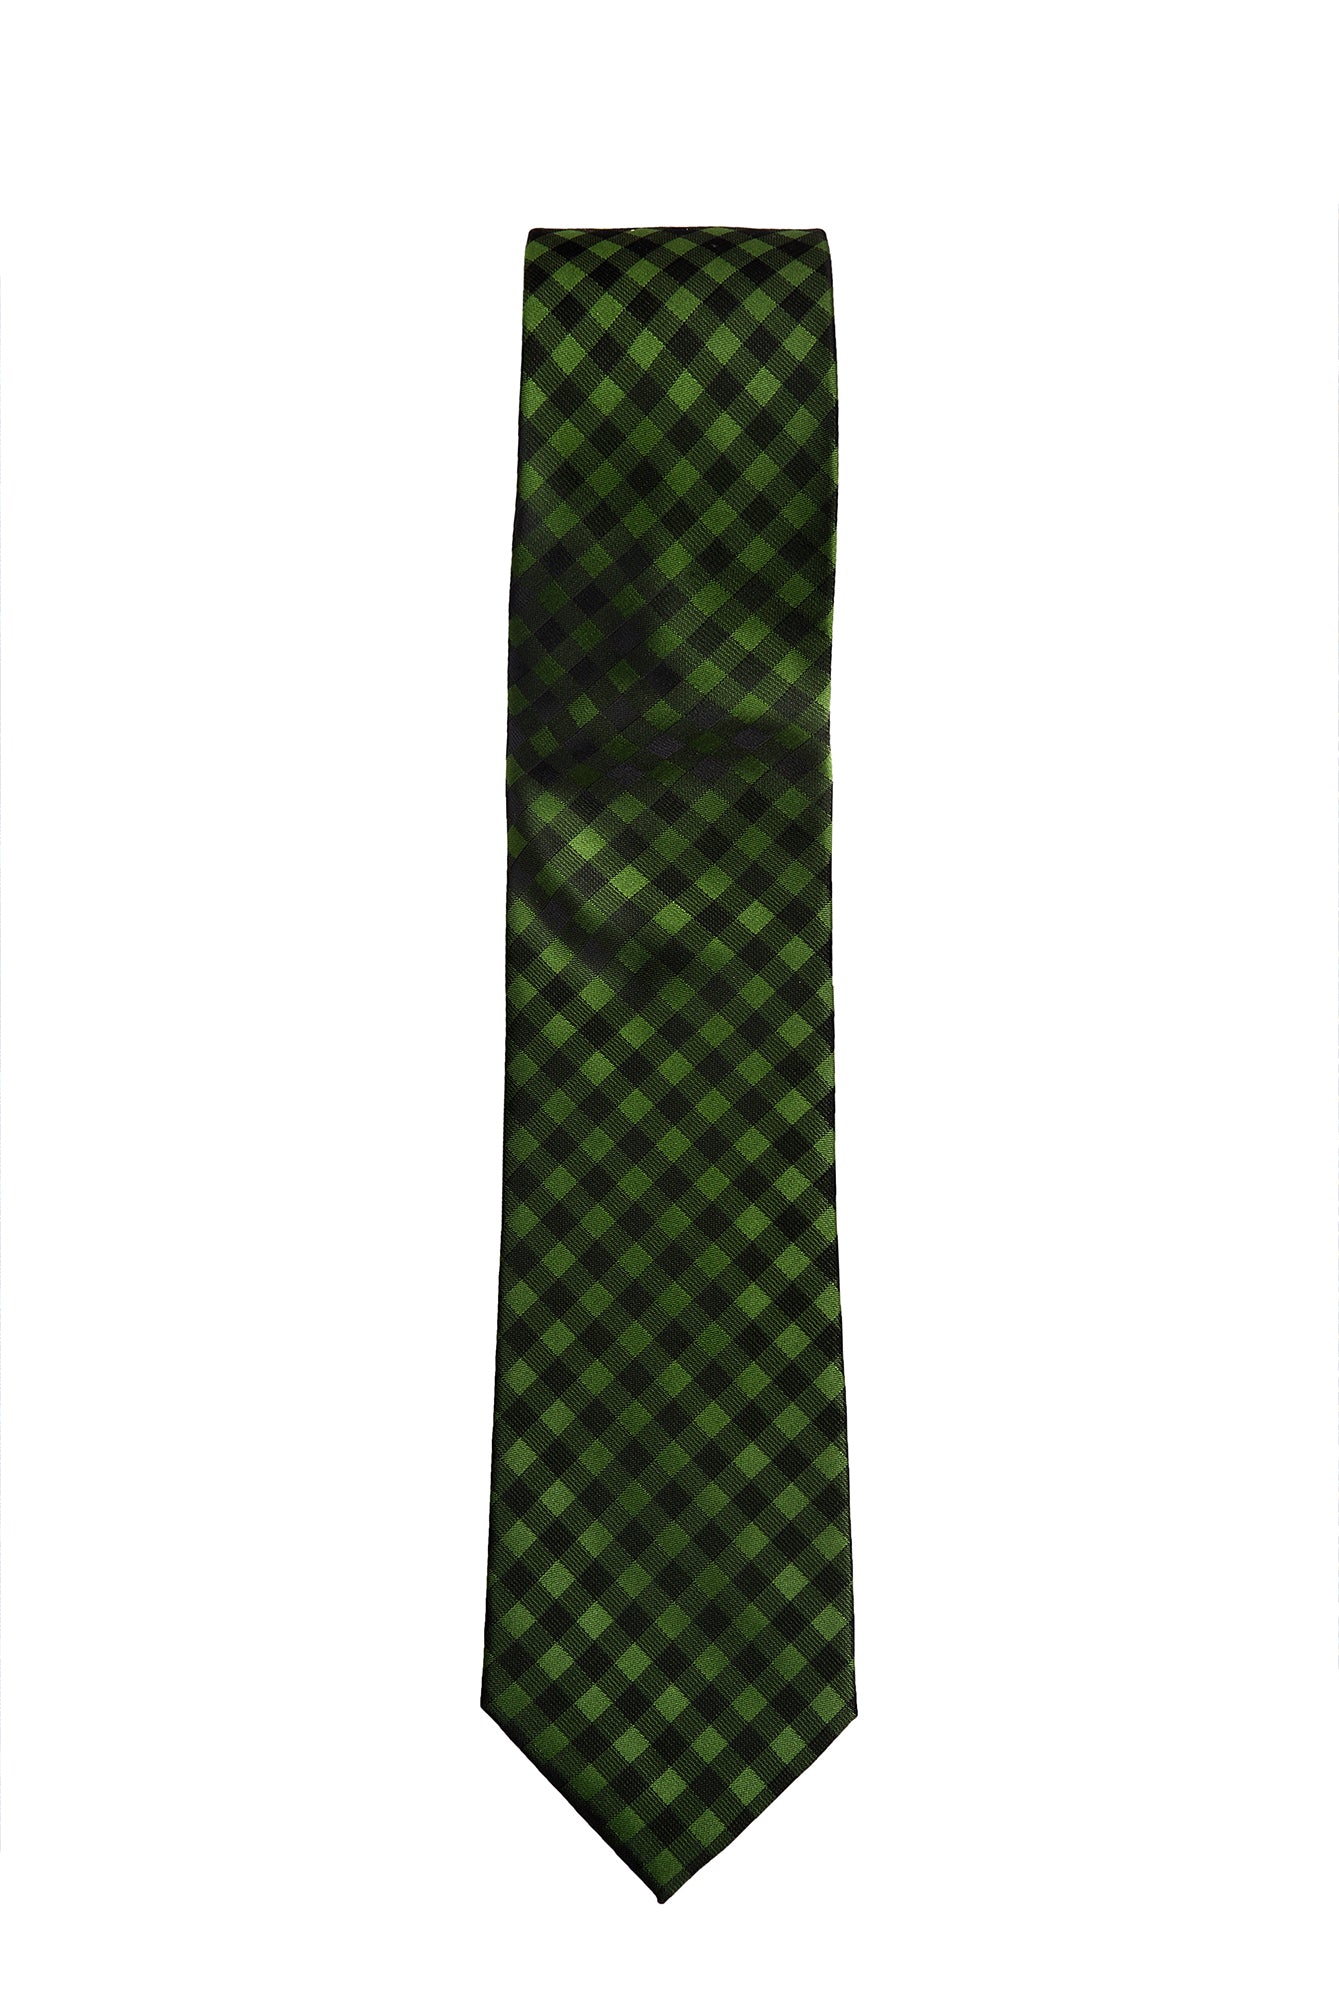 AST3191 POLYESTER WOVEN TIE